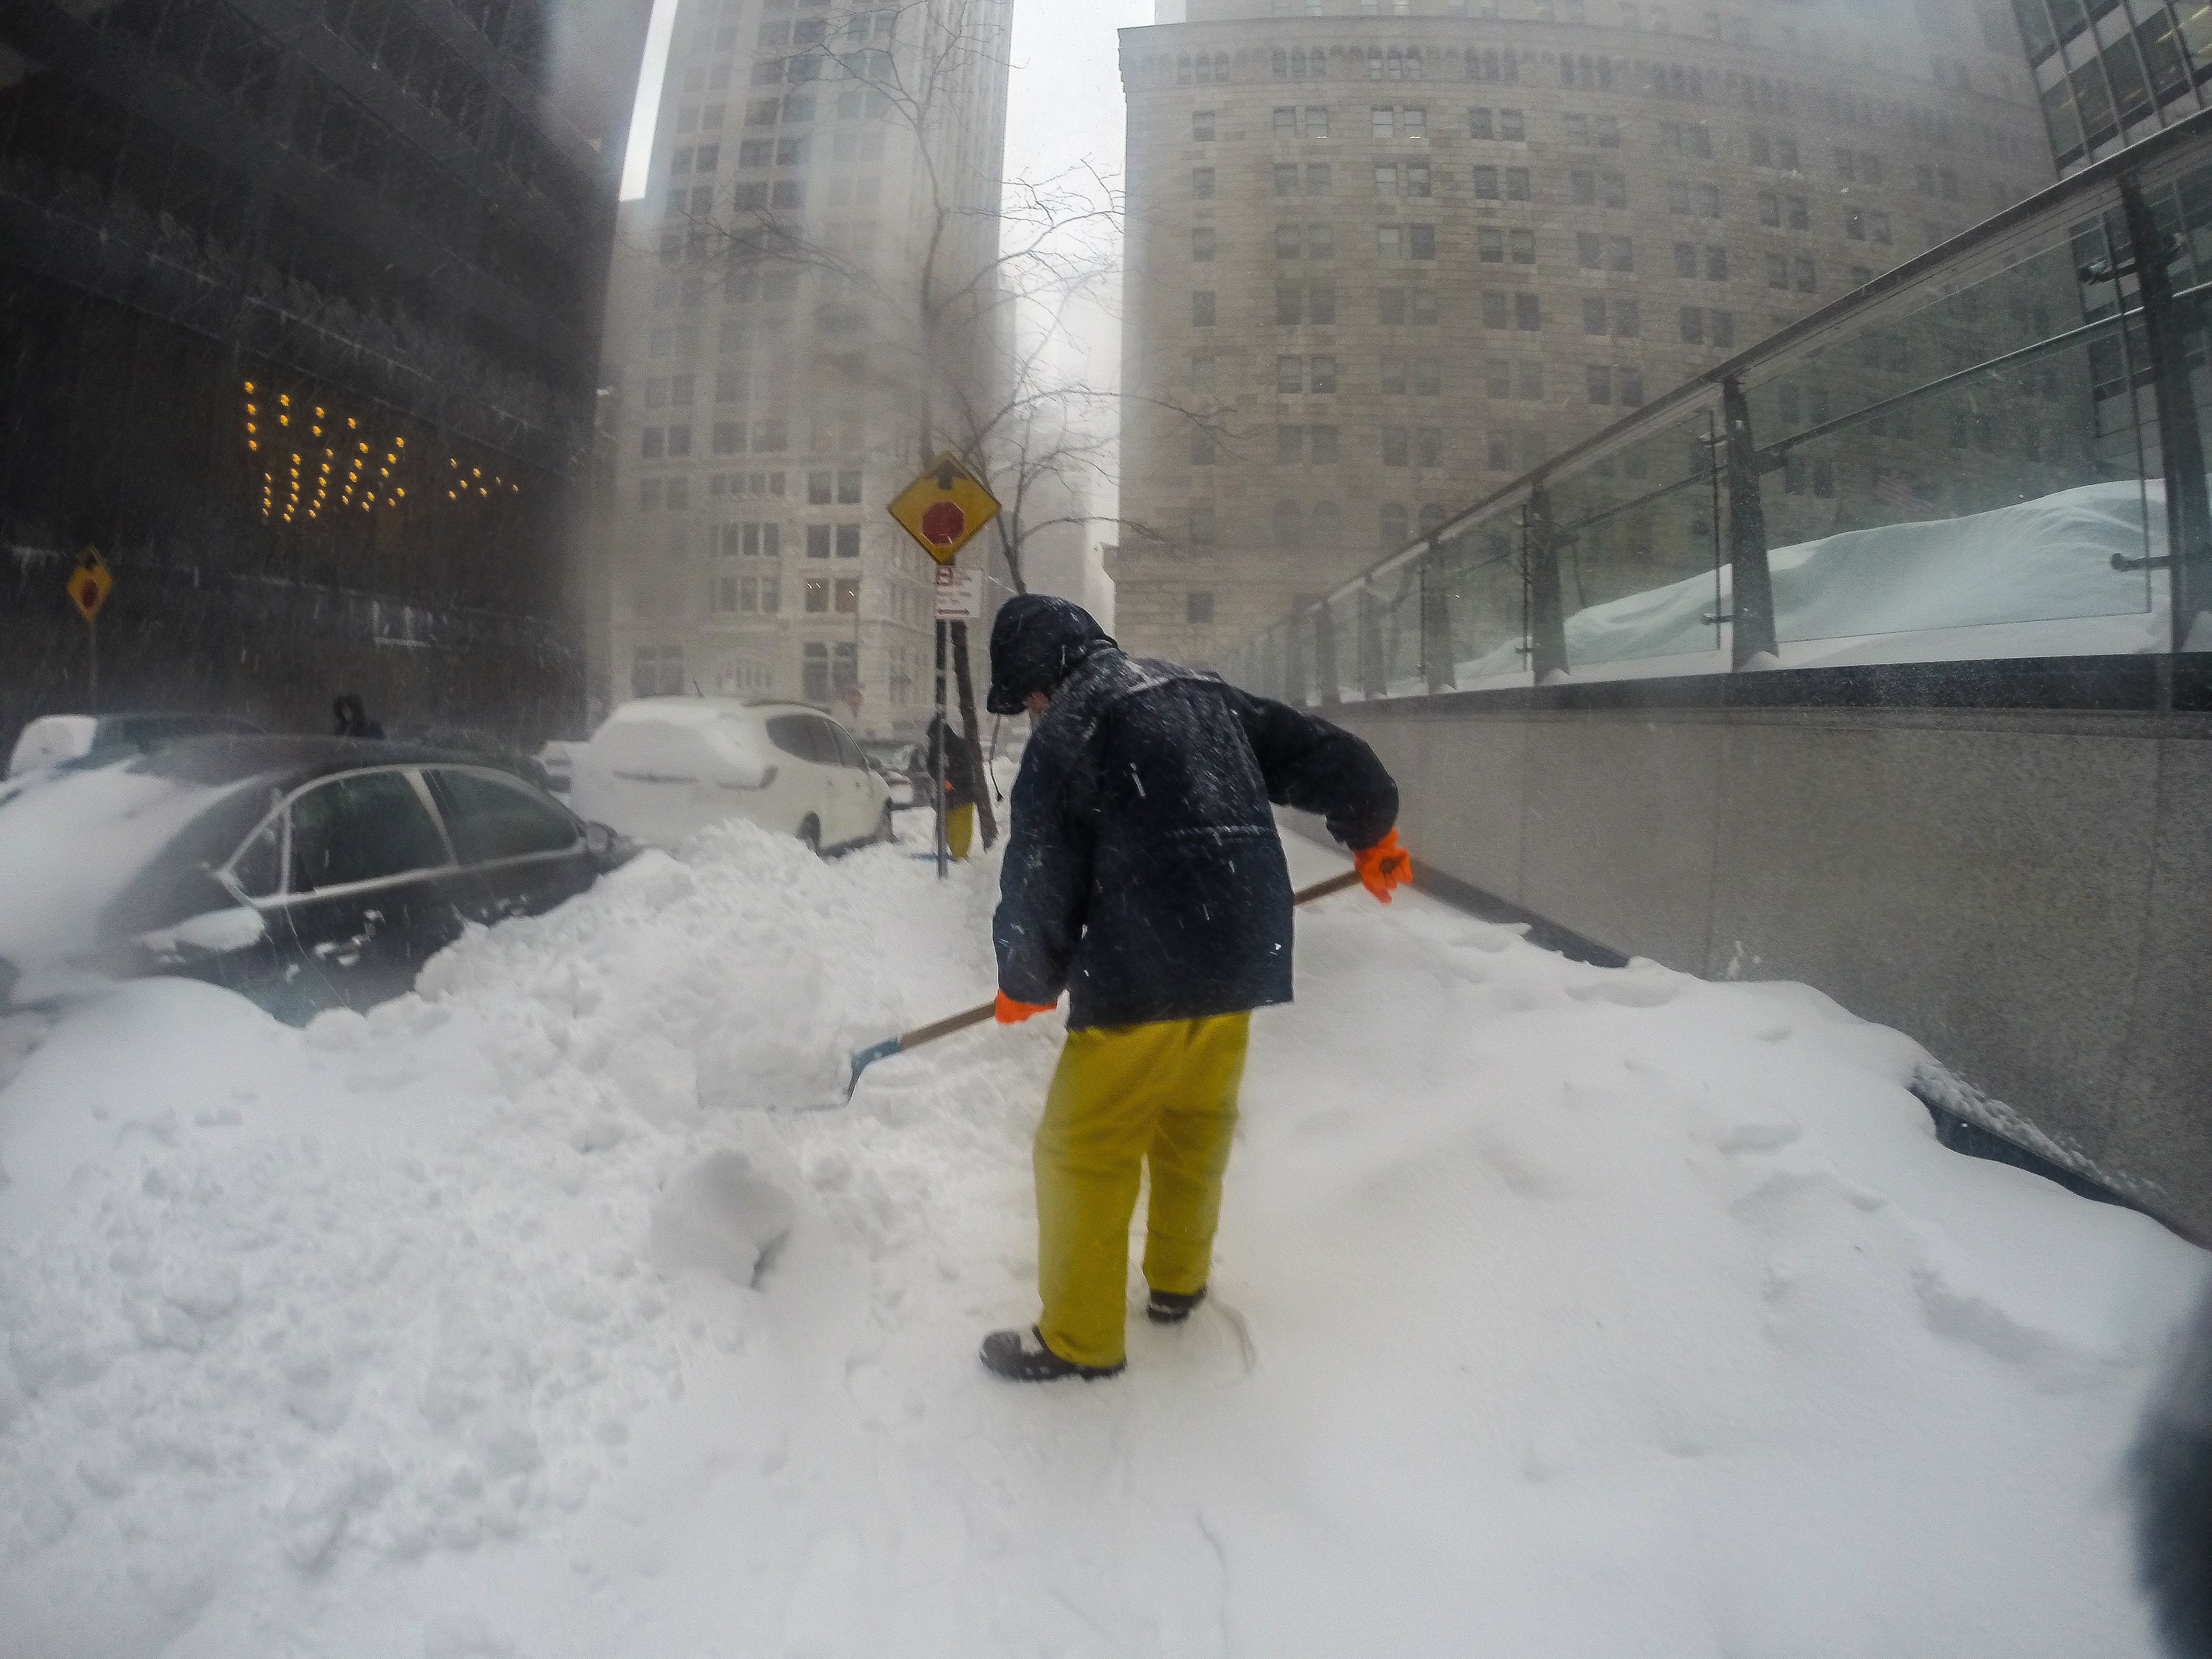 A person shovels snow from a New York City sidewalk following a blizzard.